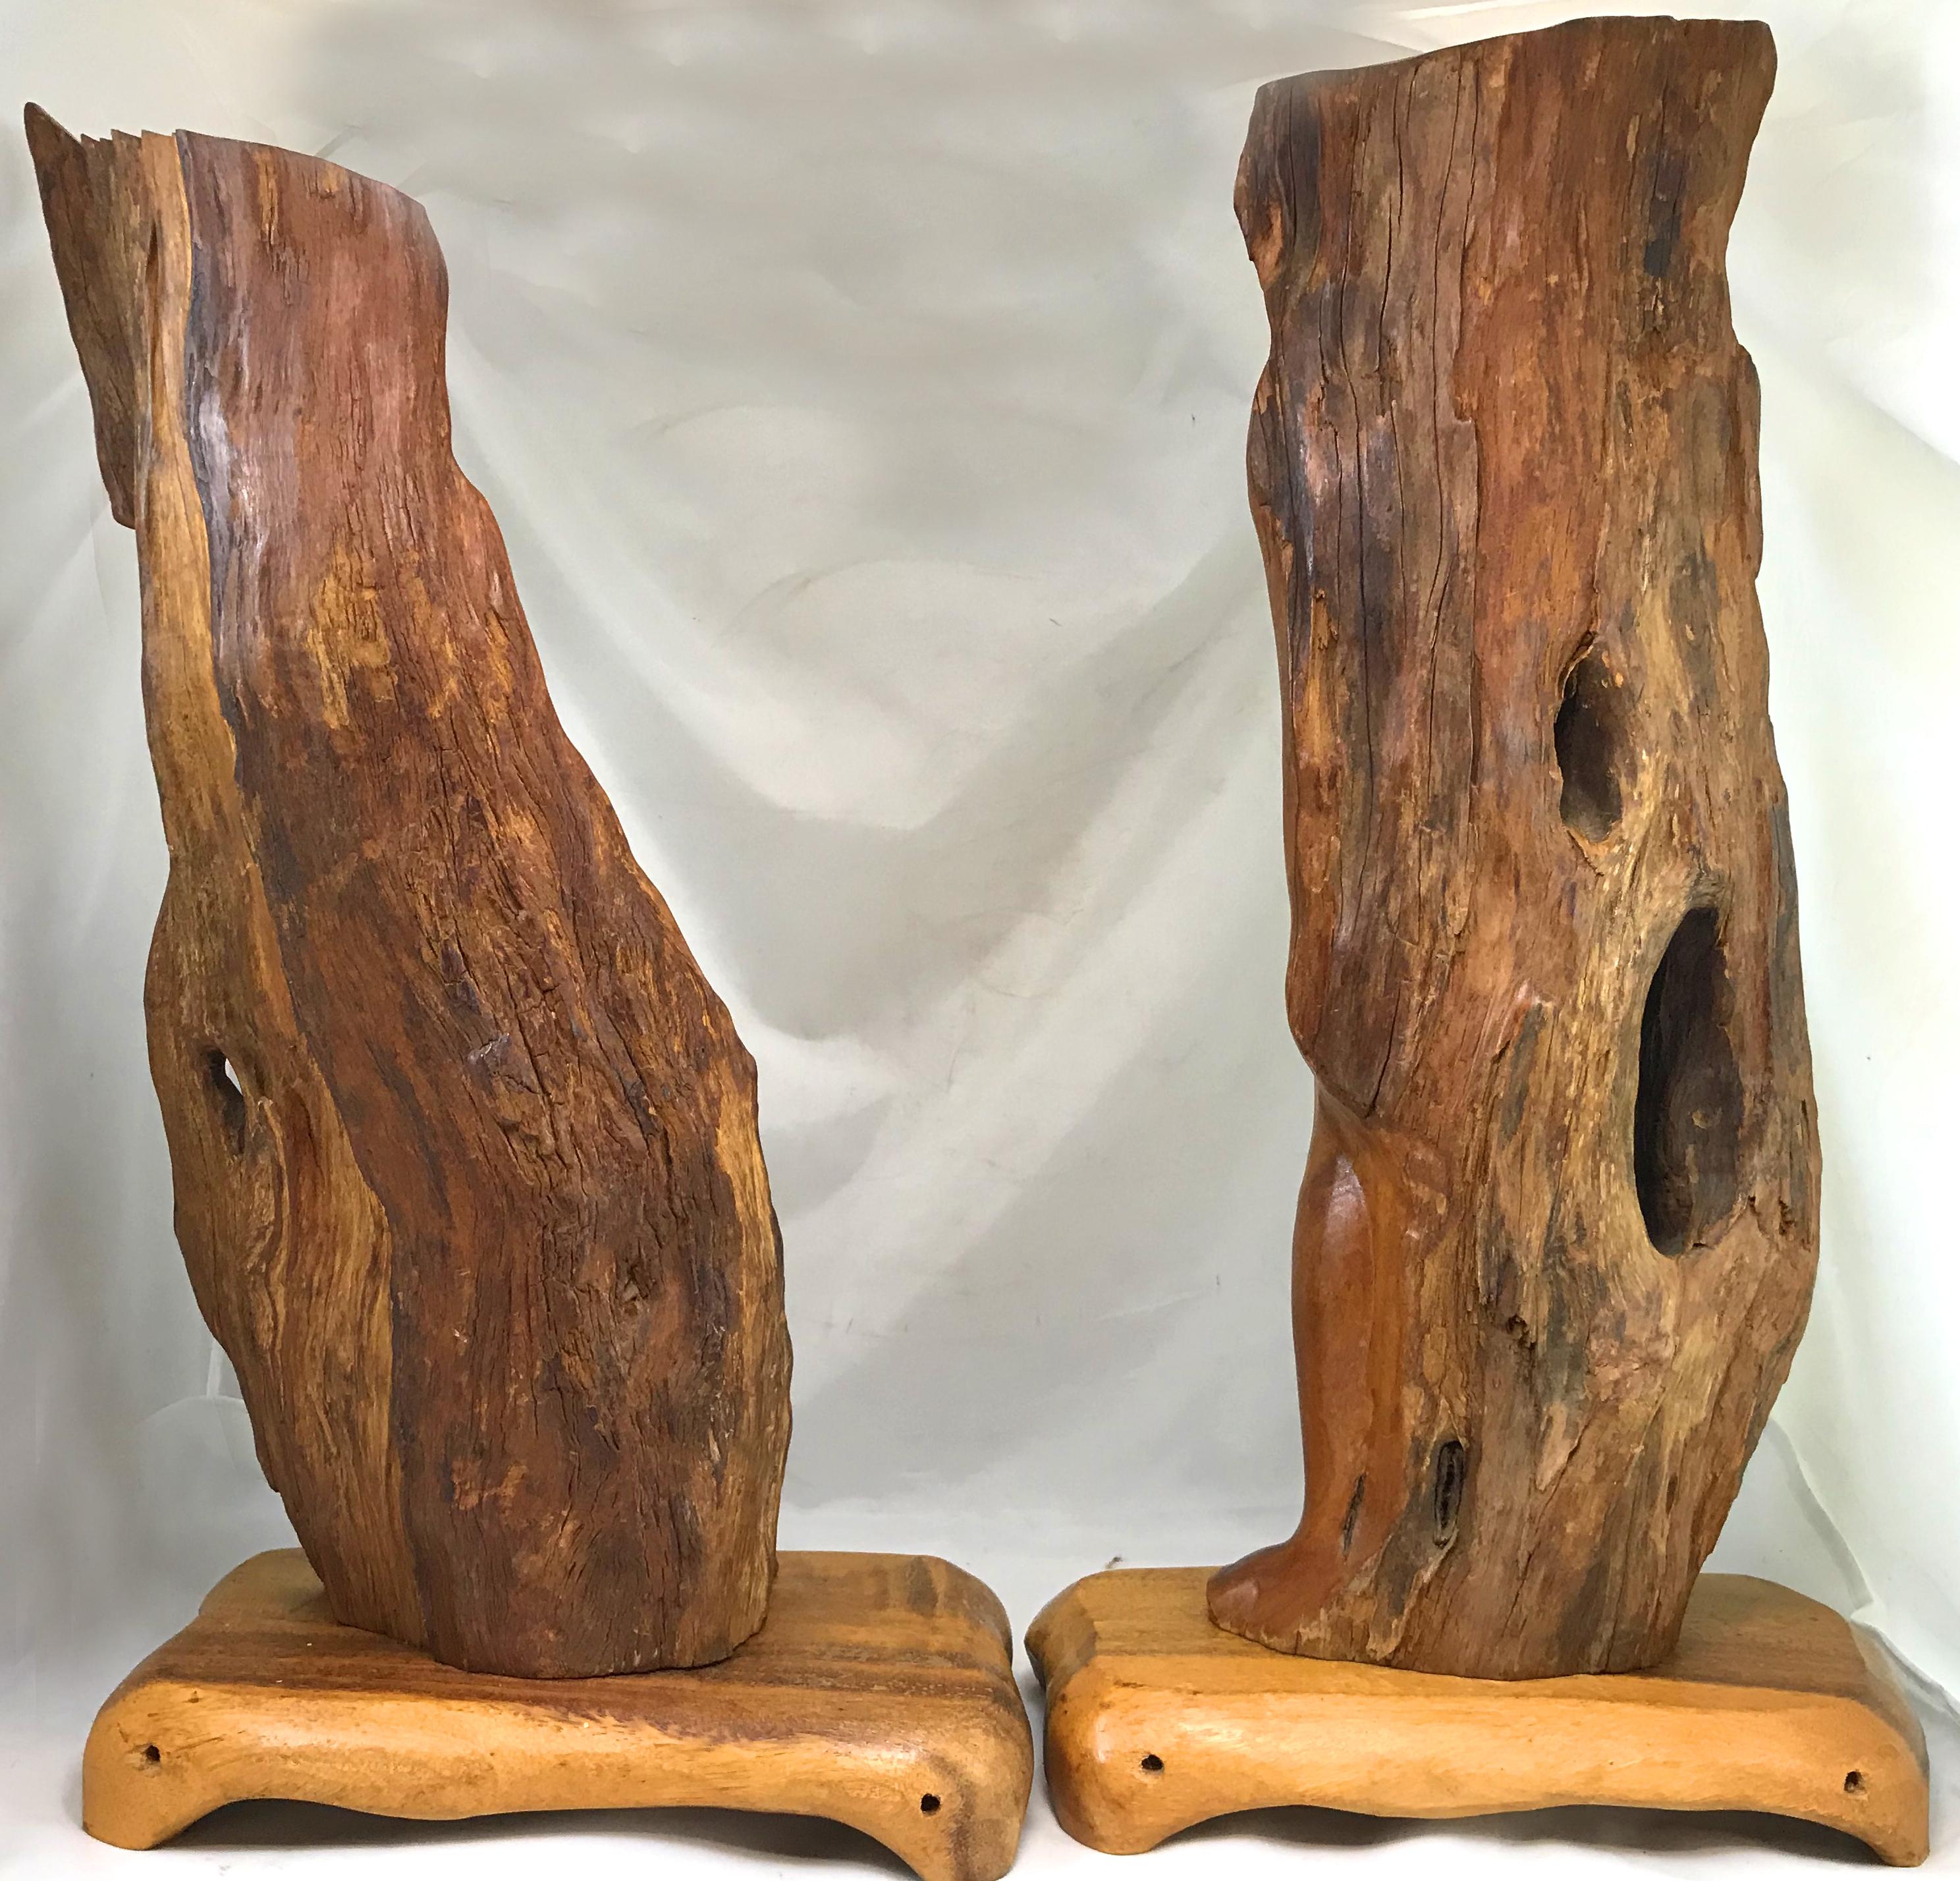 Pair of Figural Koa Wood Sculptures - Brown Figurative Sculpture by Unknown